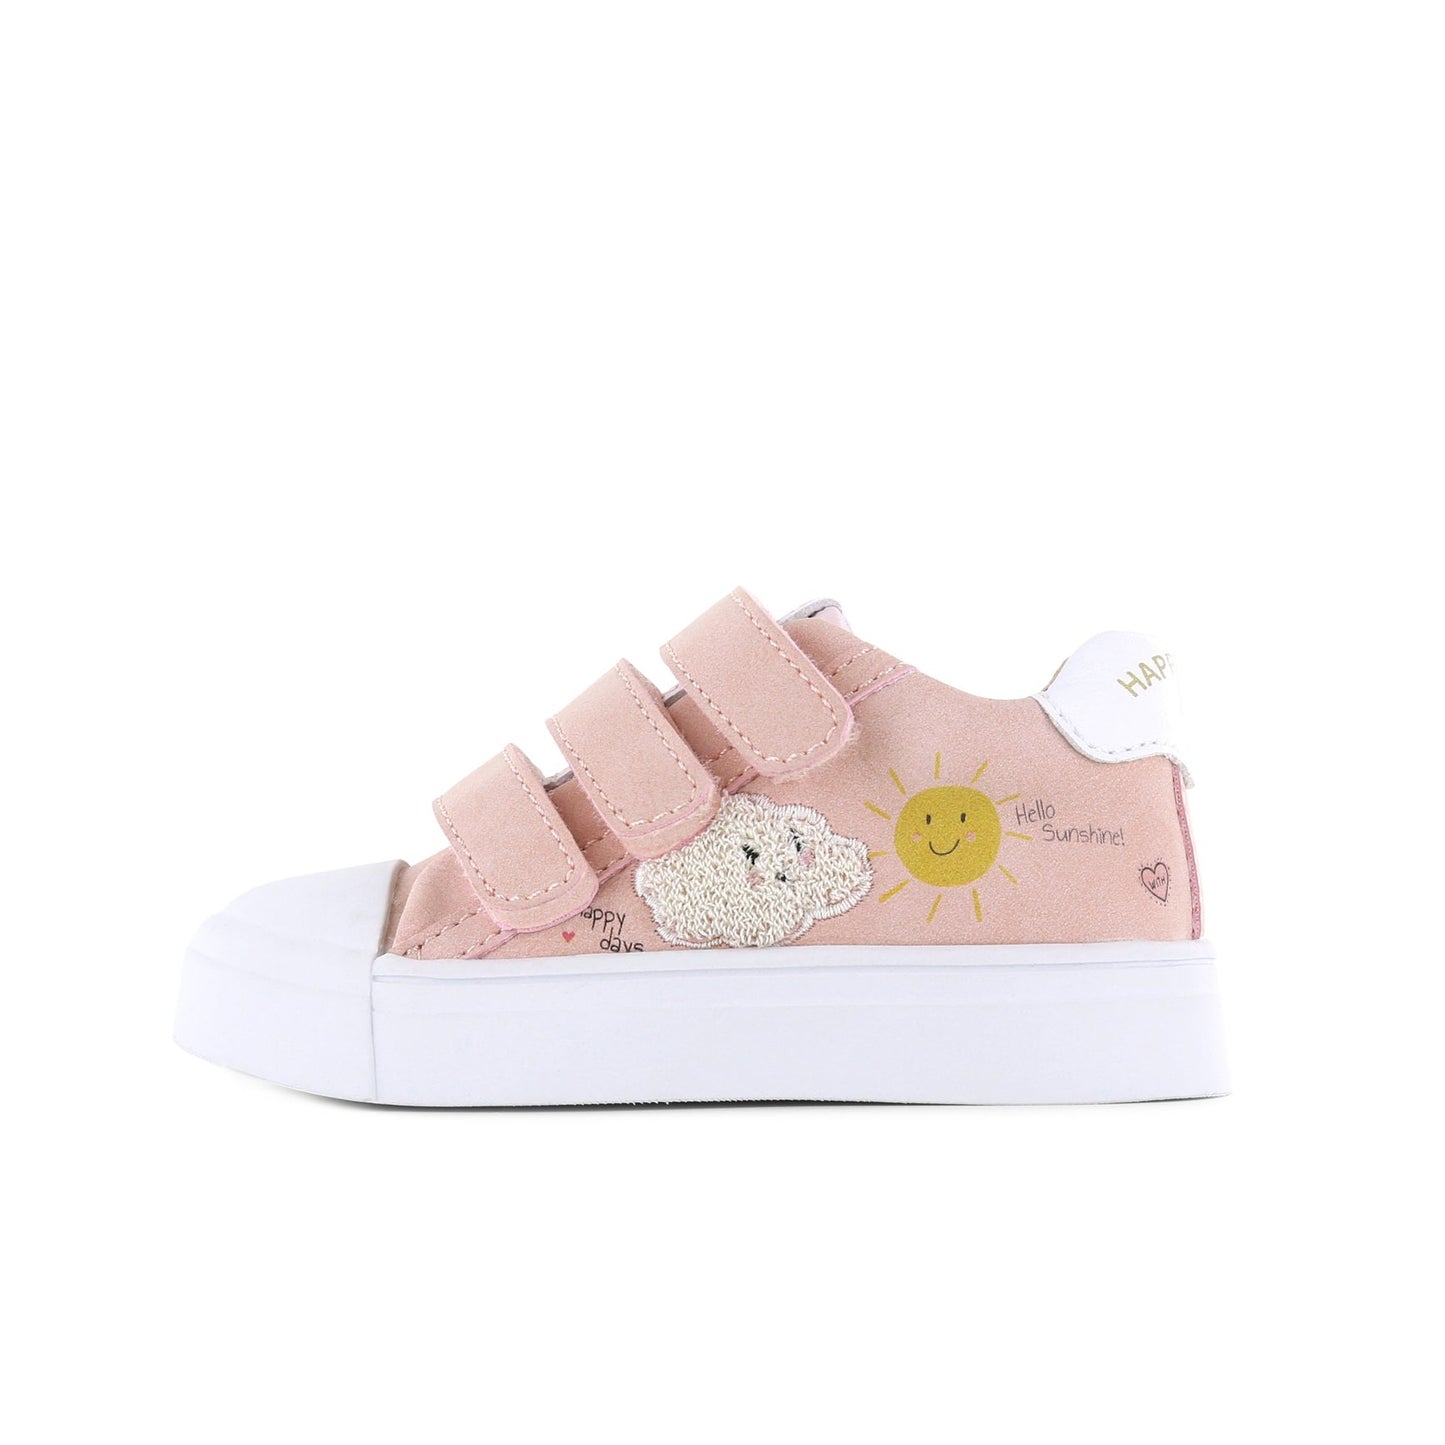 Pink Leather Riptape Sneaker Style Casual Shoe